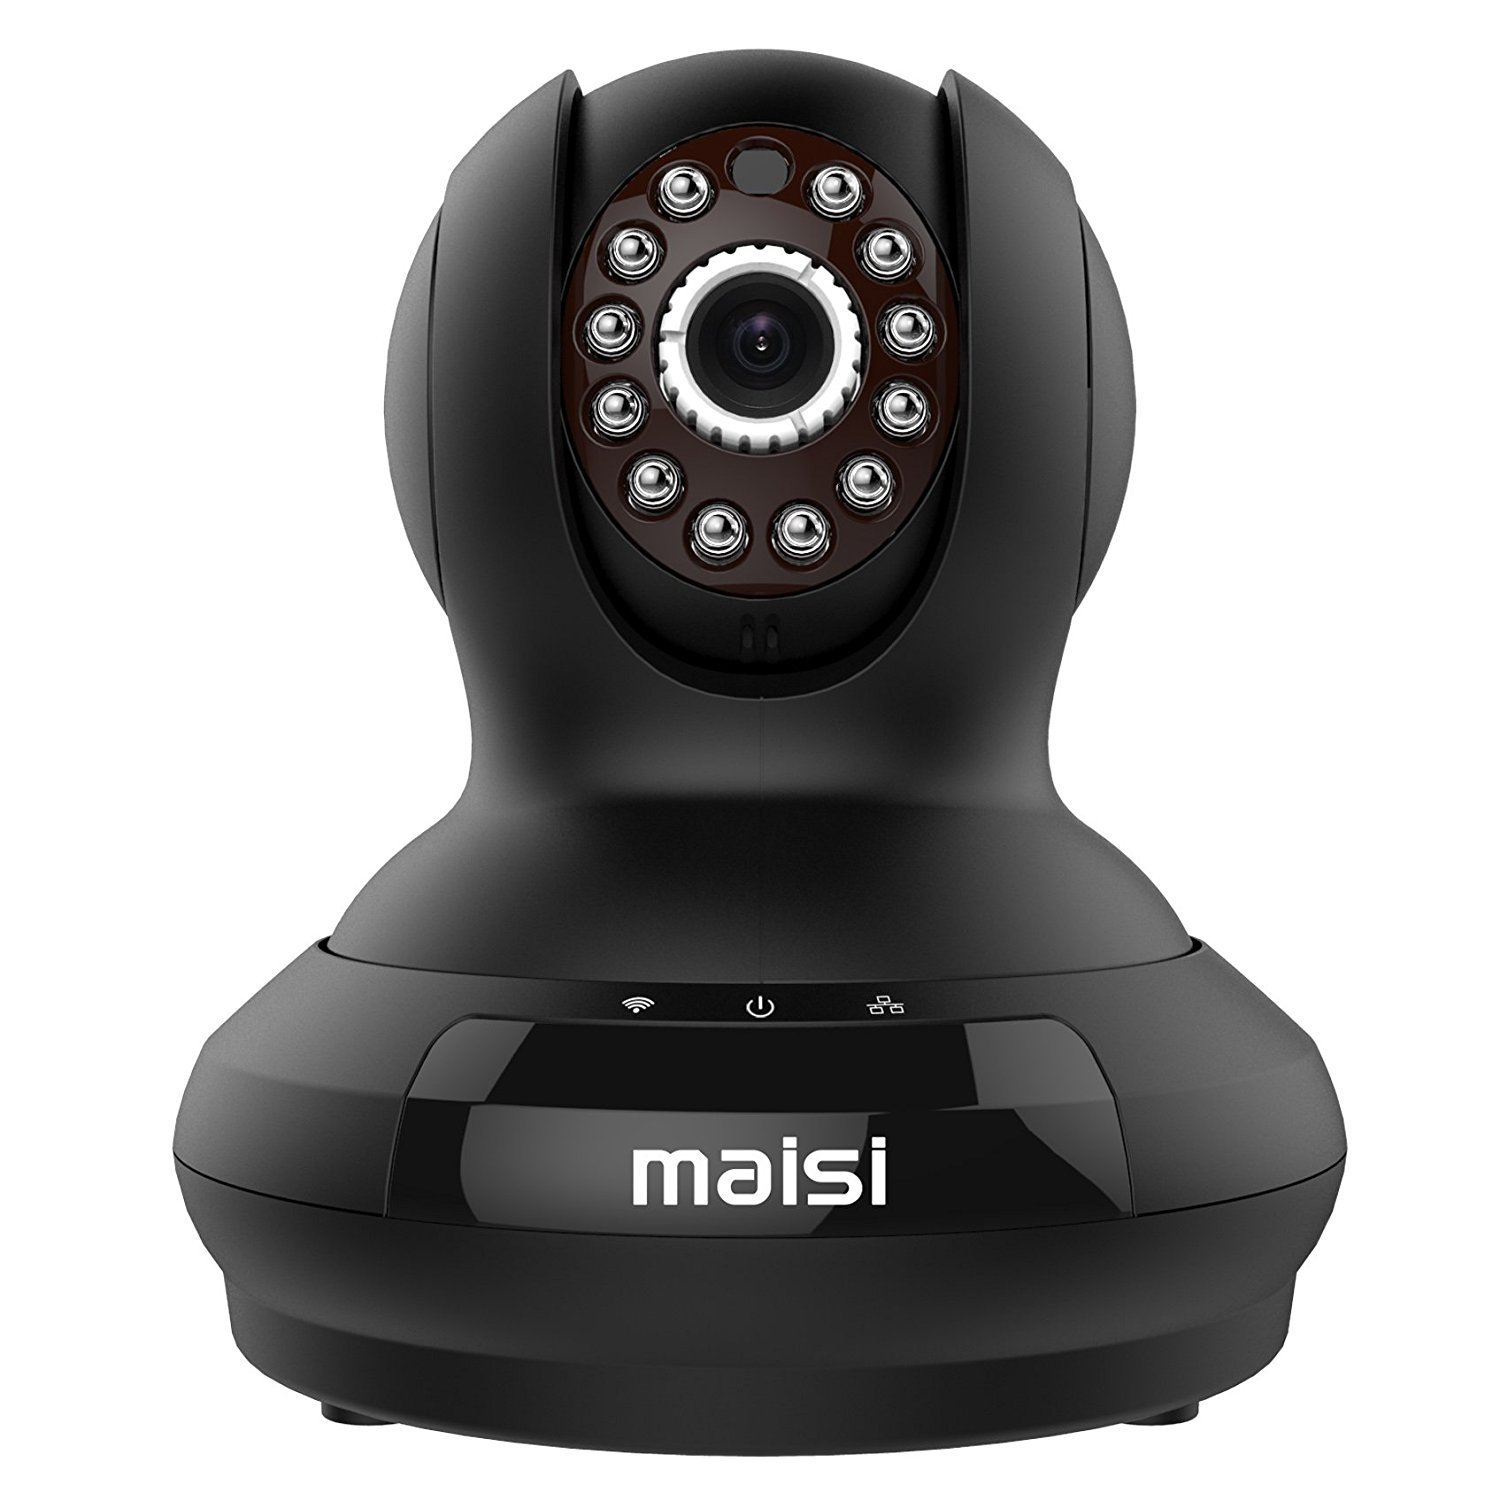 maisi camera not connecting to wifi